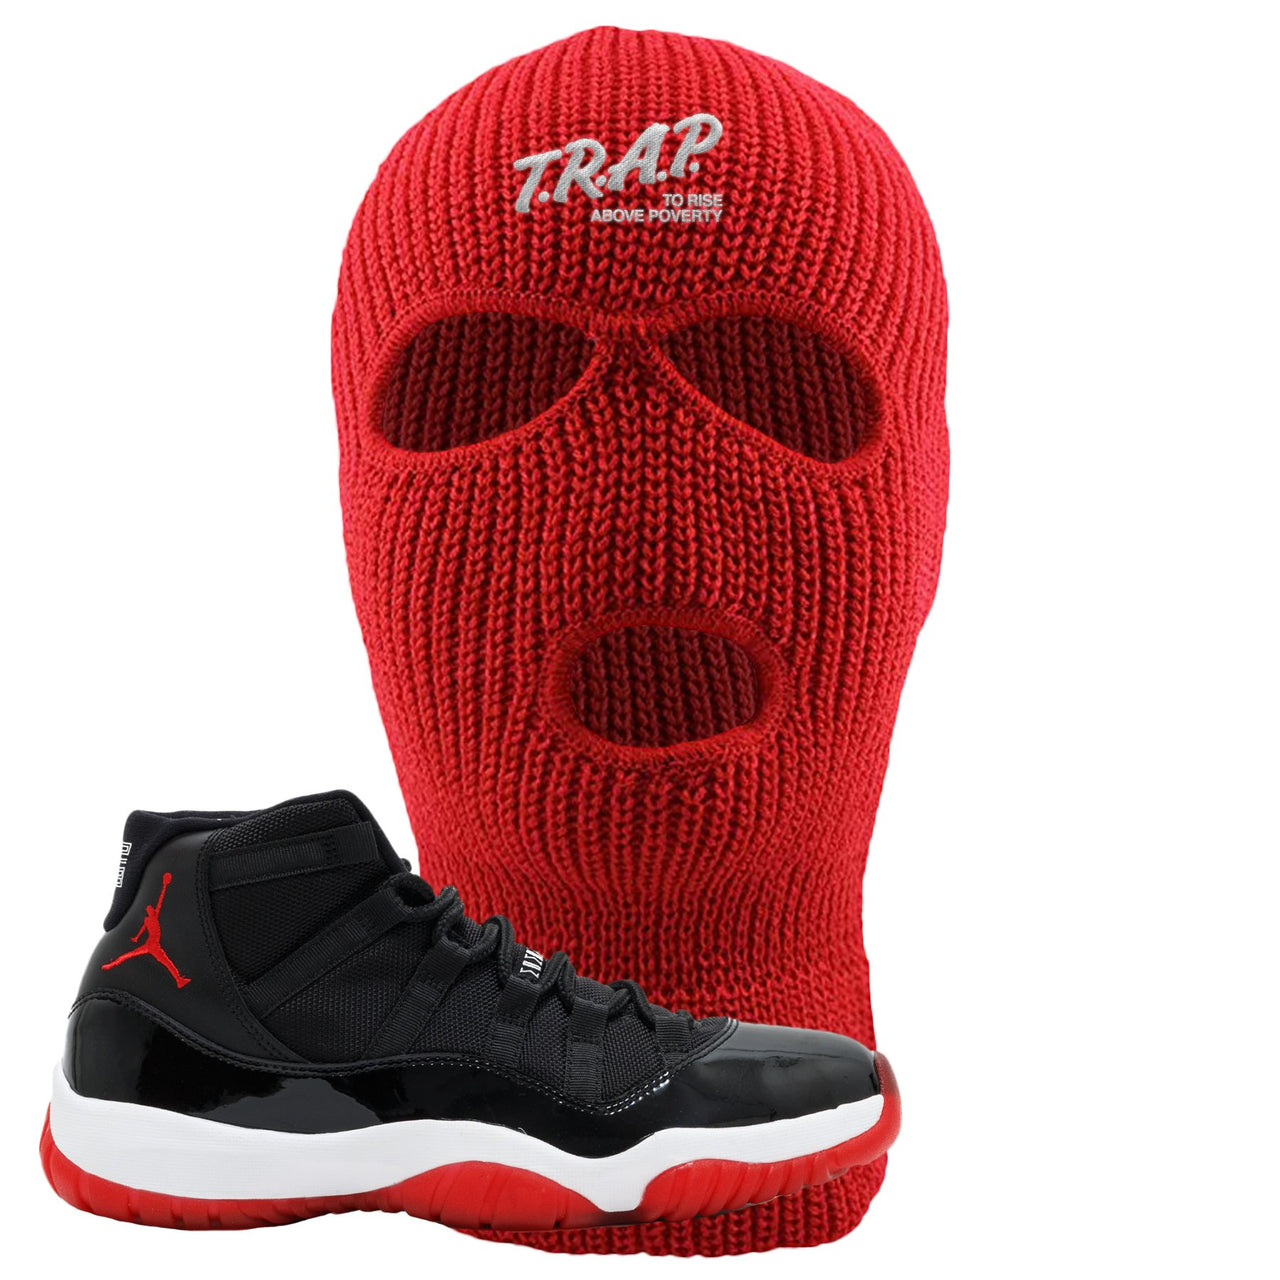 Jordan 11 Bred Trap To Rise Above Poverty Red Sneaker Matching Ski Mask